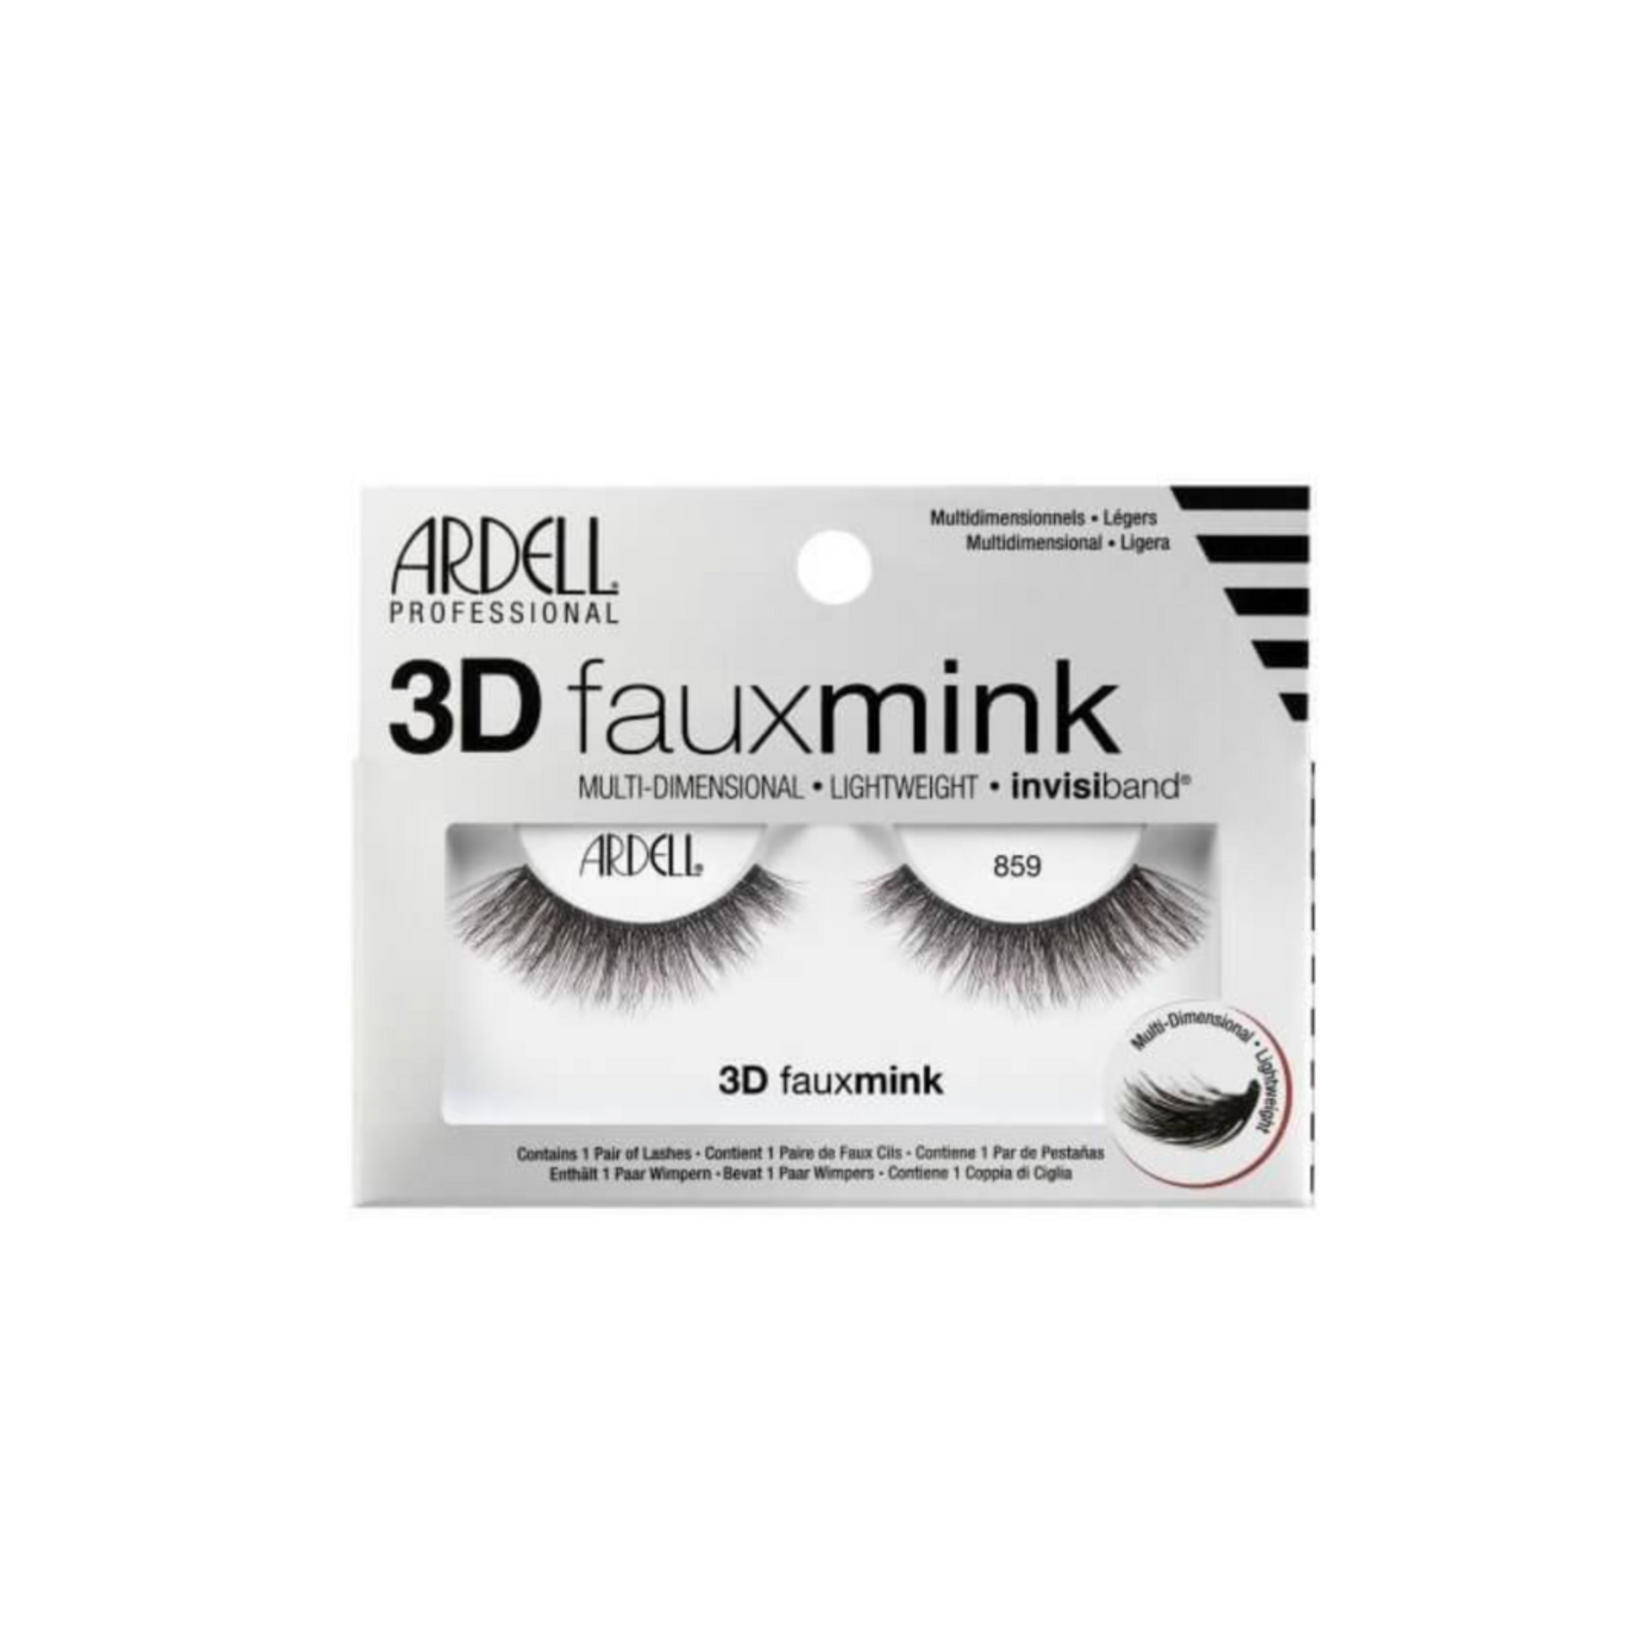 Ardell Ardell Professional 3D Fauxmink 859 Lashes